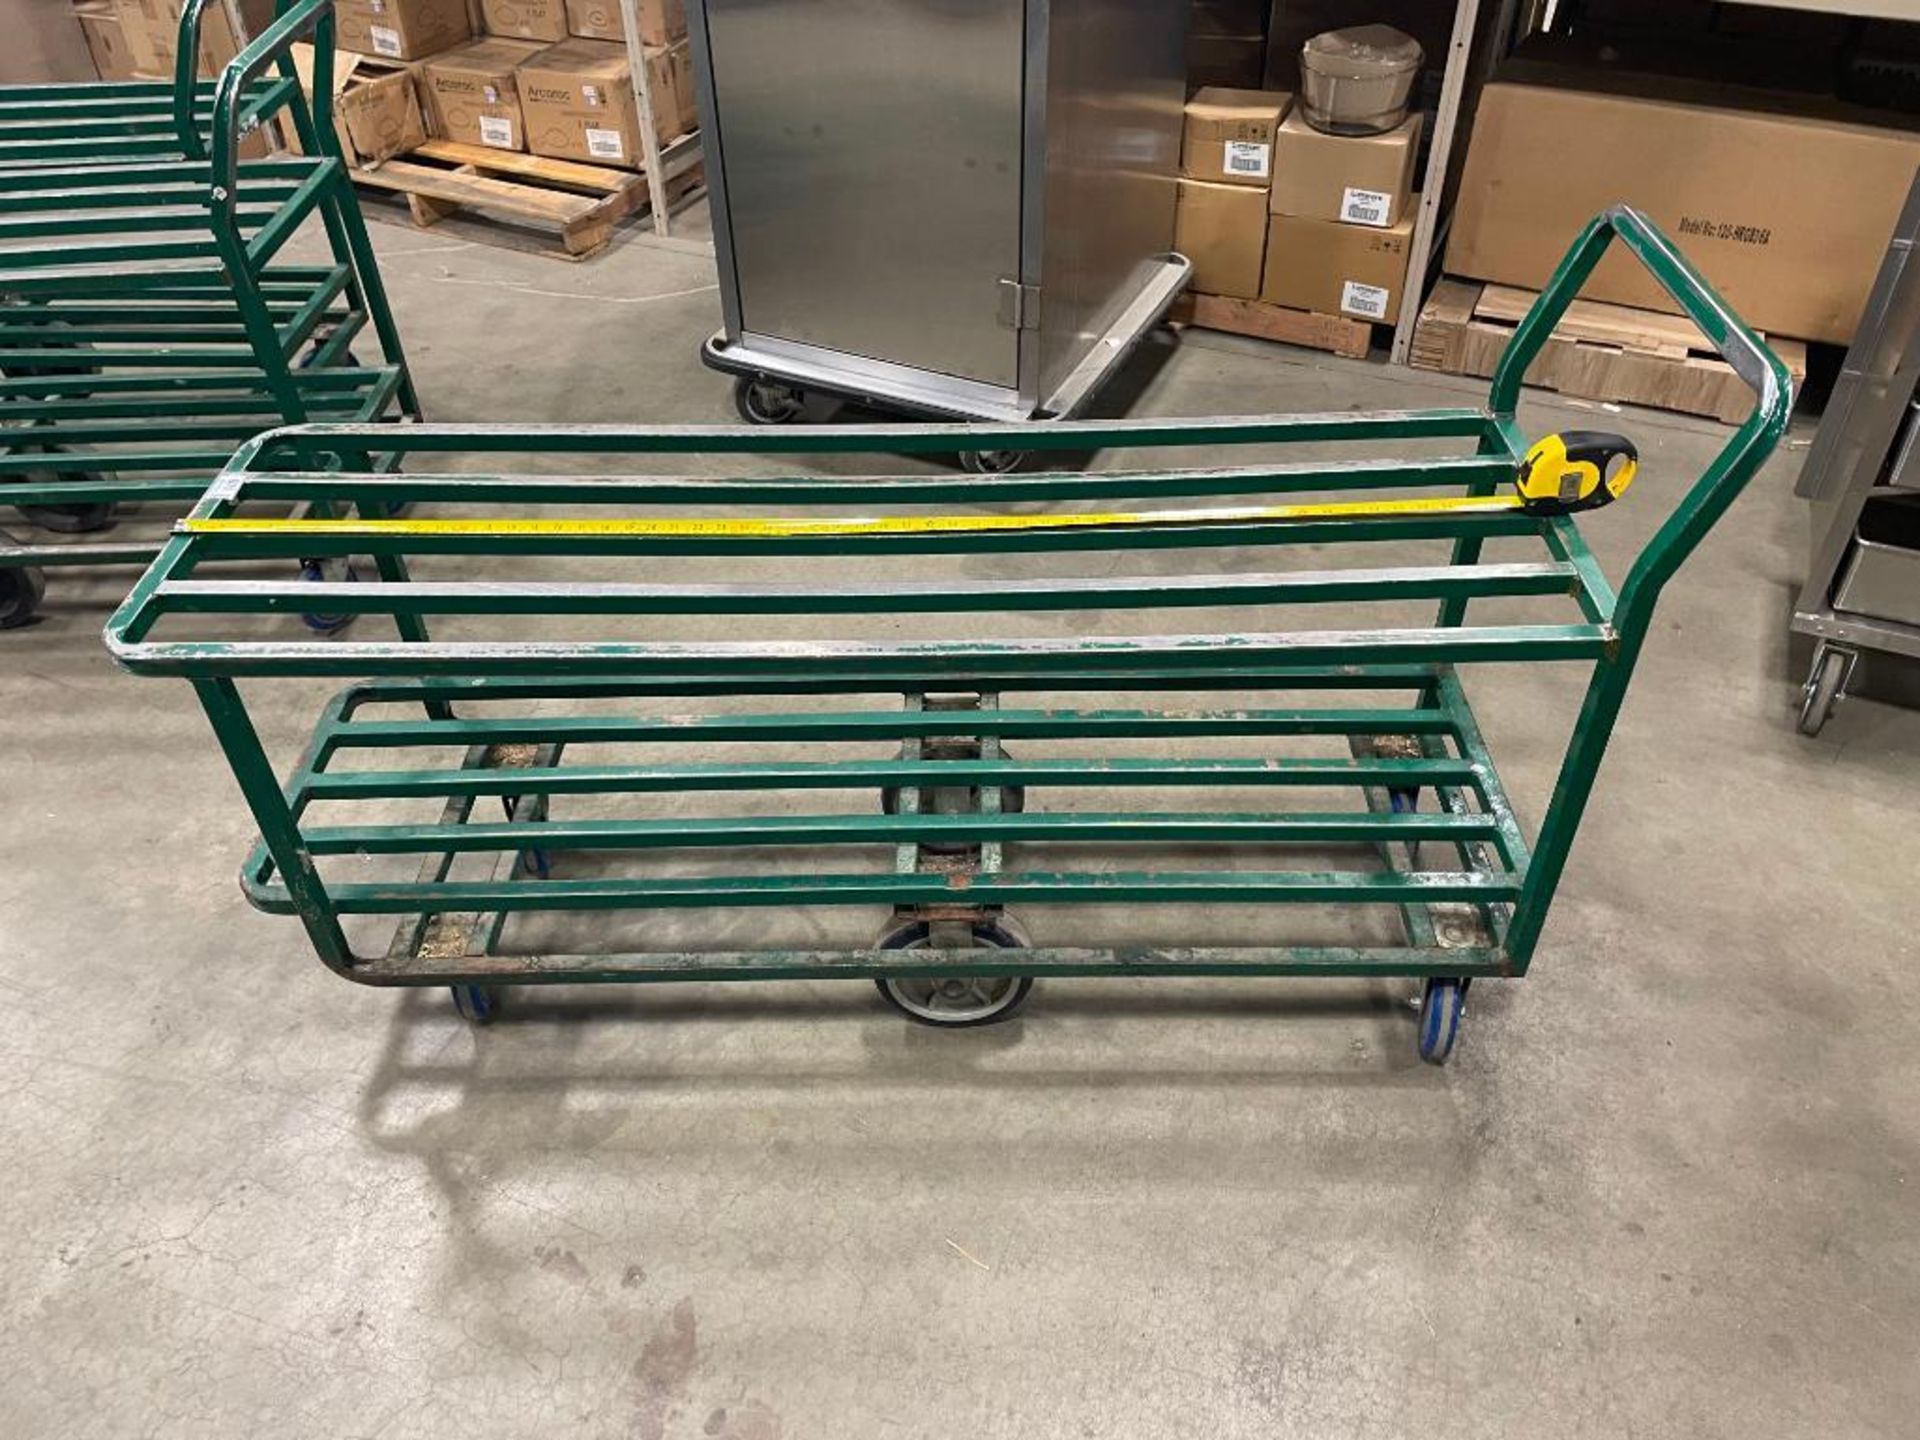 2 TIER GREEN STEEL WAREHOUSE STOCKING CART - Image 2 of 3